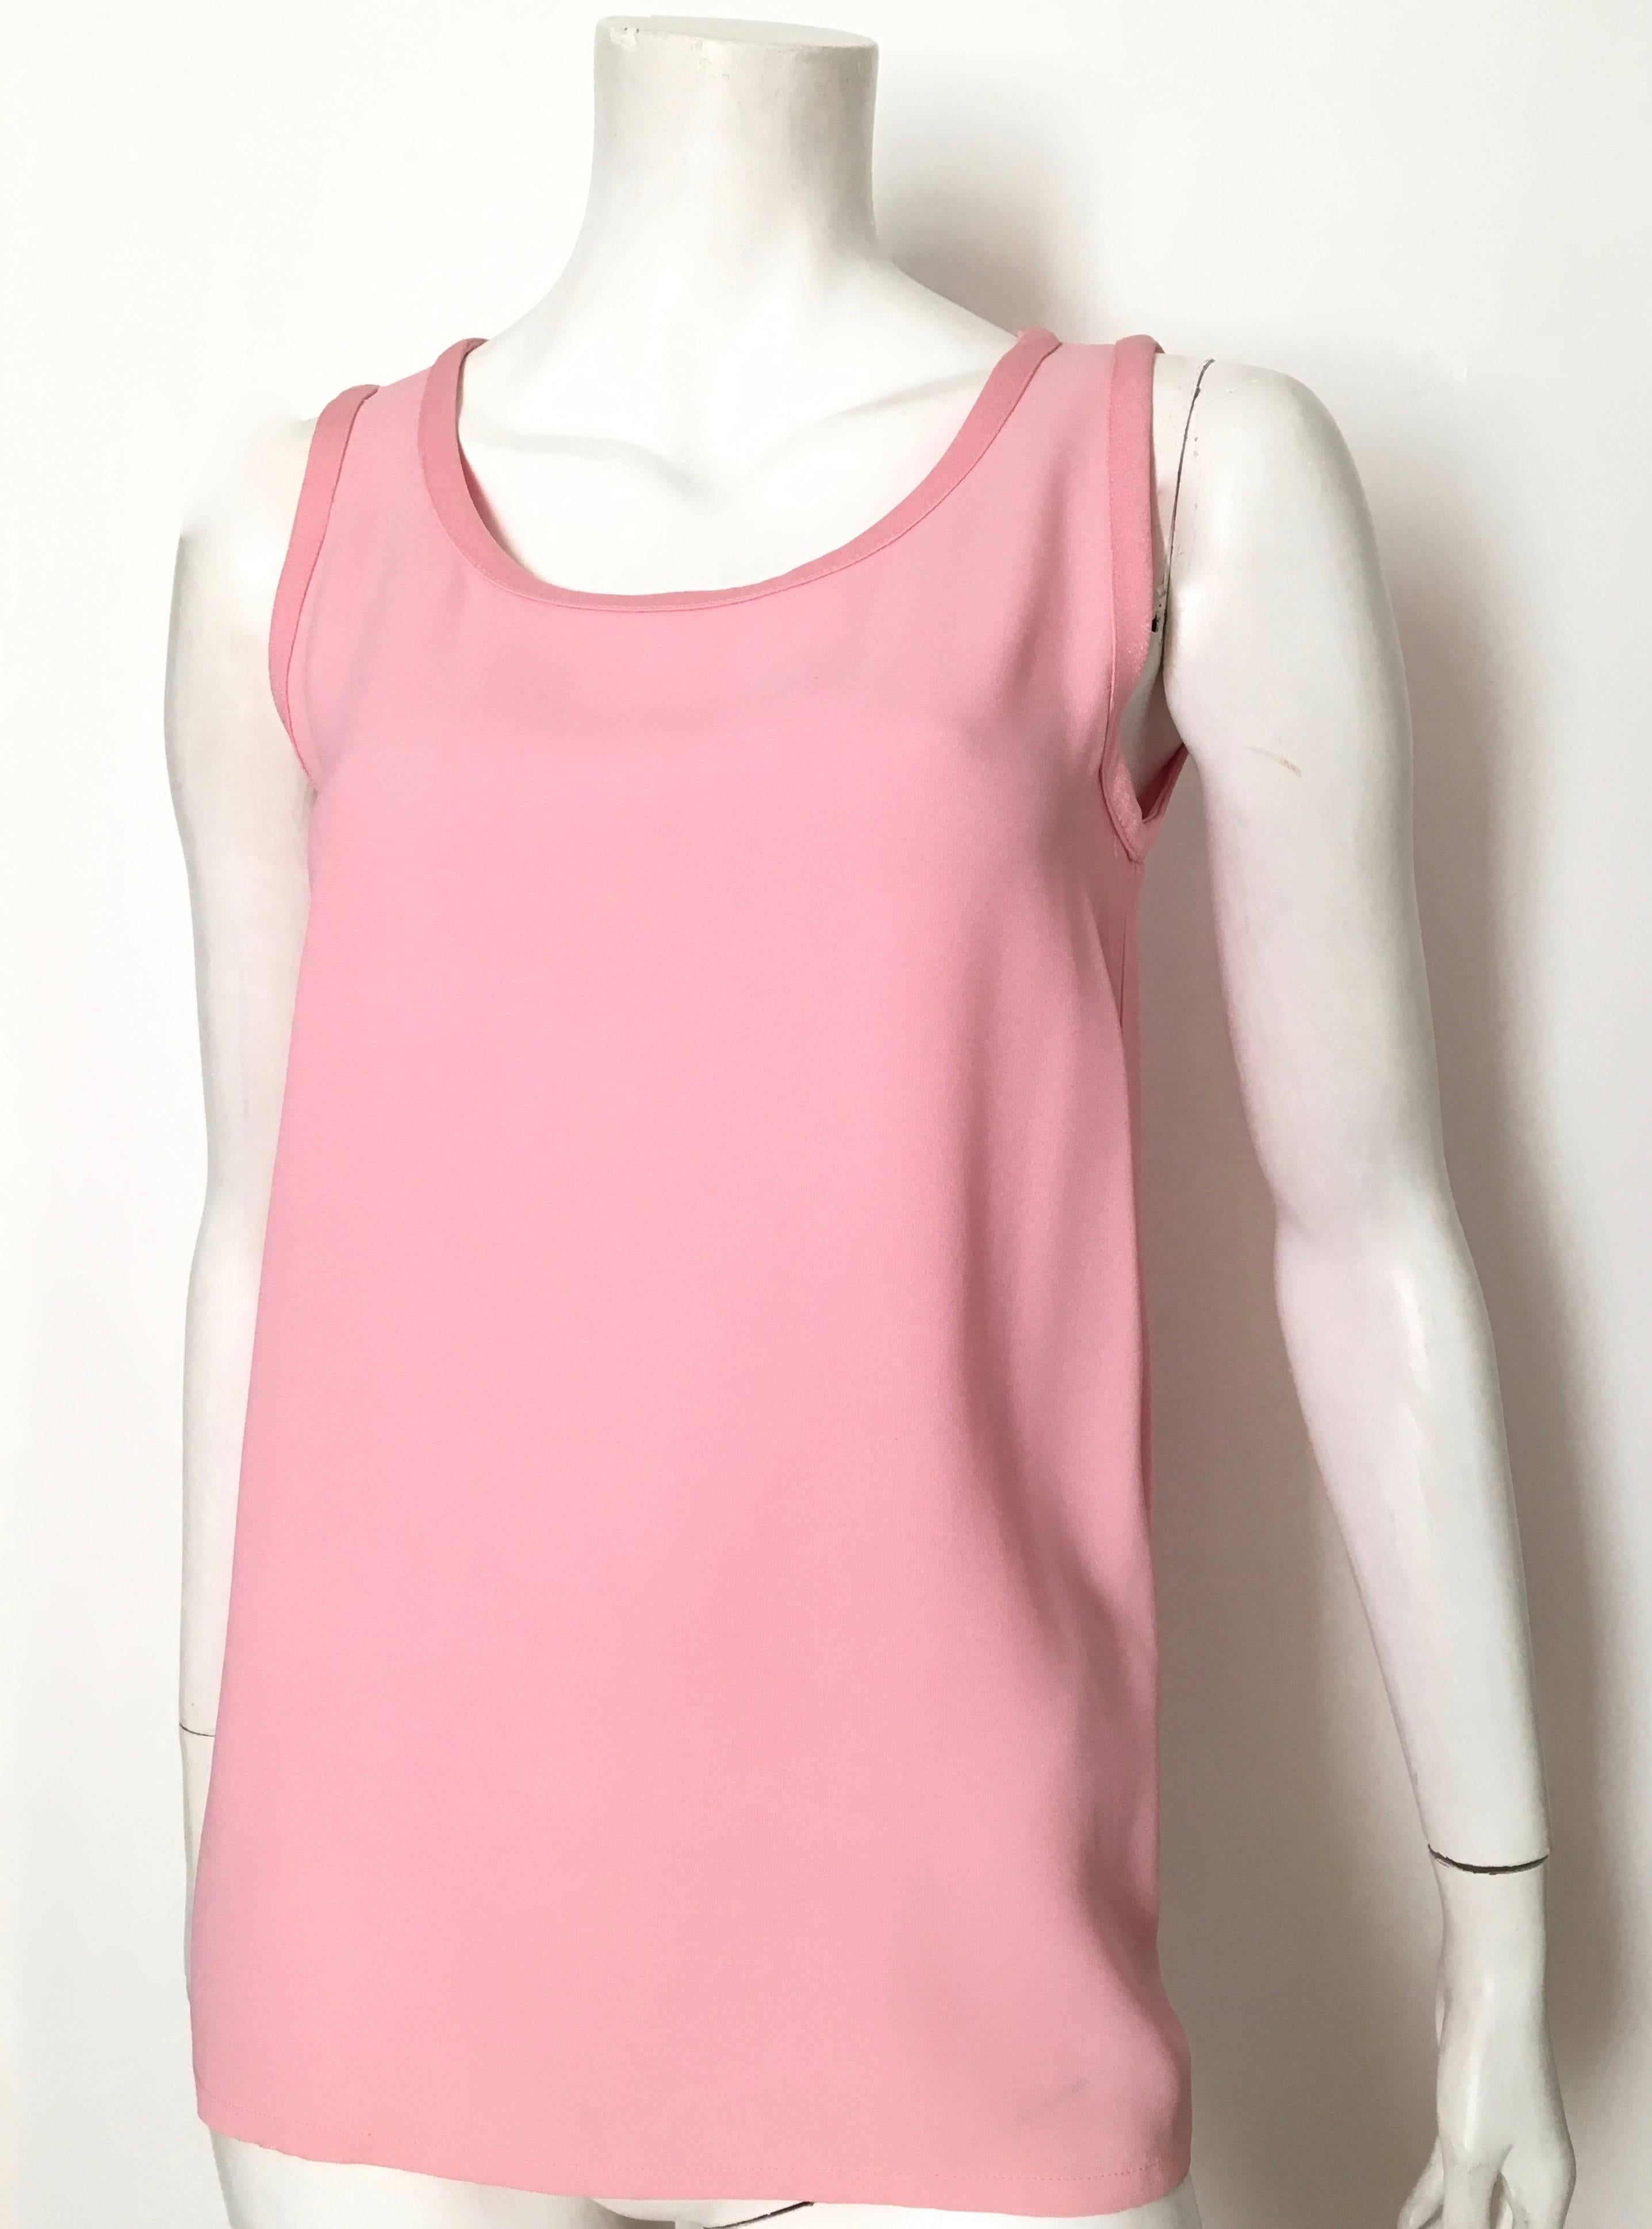 Saint Laurent Rive Gauche 1970s pink silk crepe sleeveless oversized blouse is a French size 38 and fits like an USA size 6. This blouse is supposed to be an oversized blouse, it's all about the flow of fabric. Match this with your vintage YSL